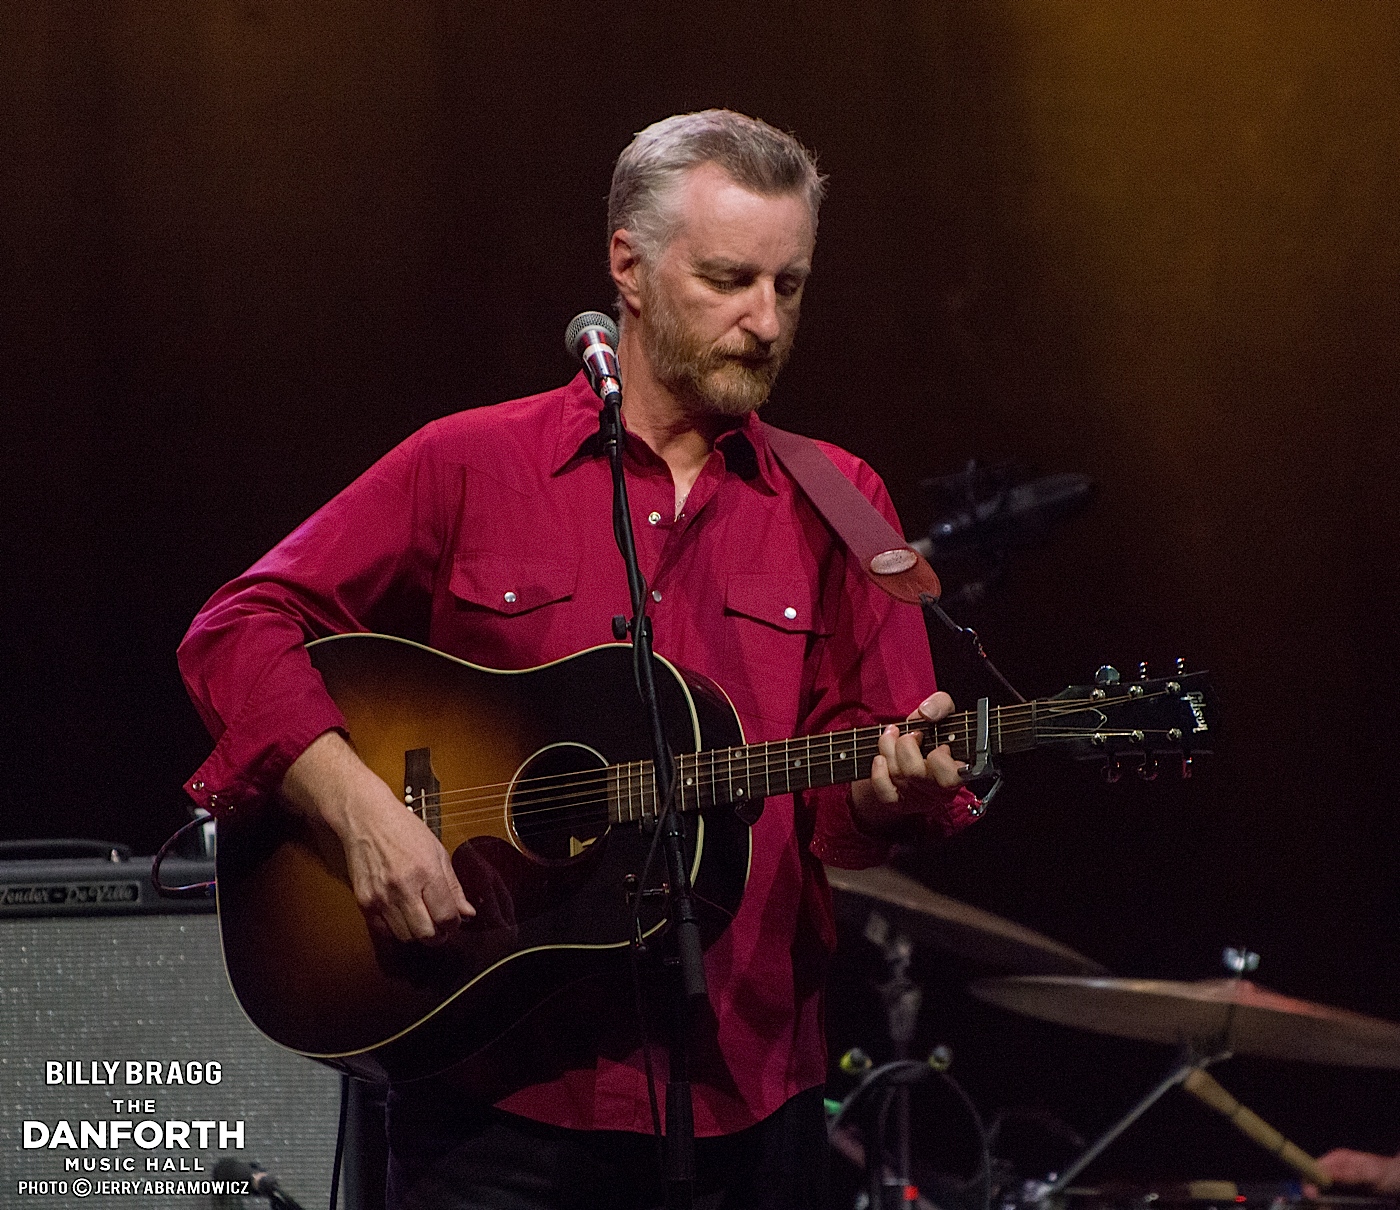 BILLY BRAGG plays a sold out show at The Danforth Music Hall.